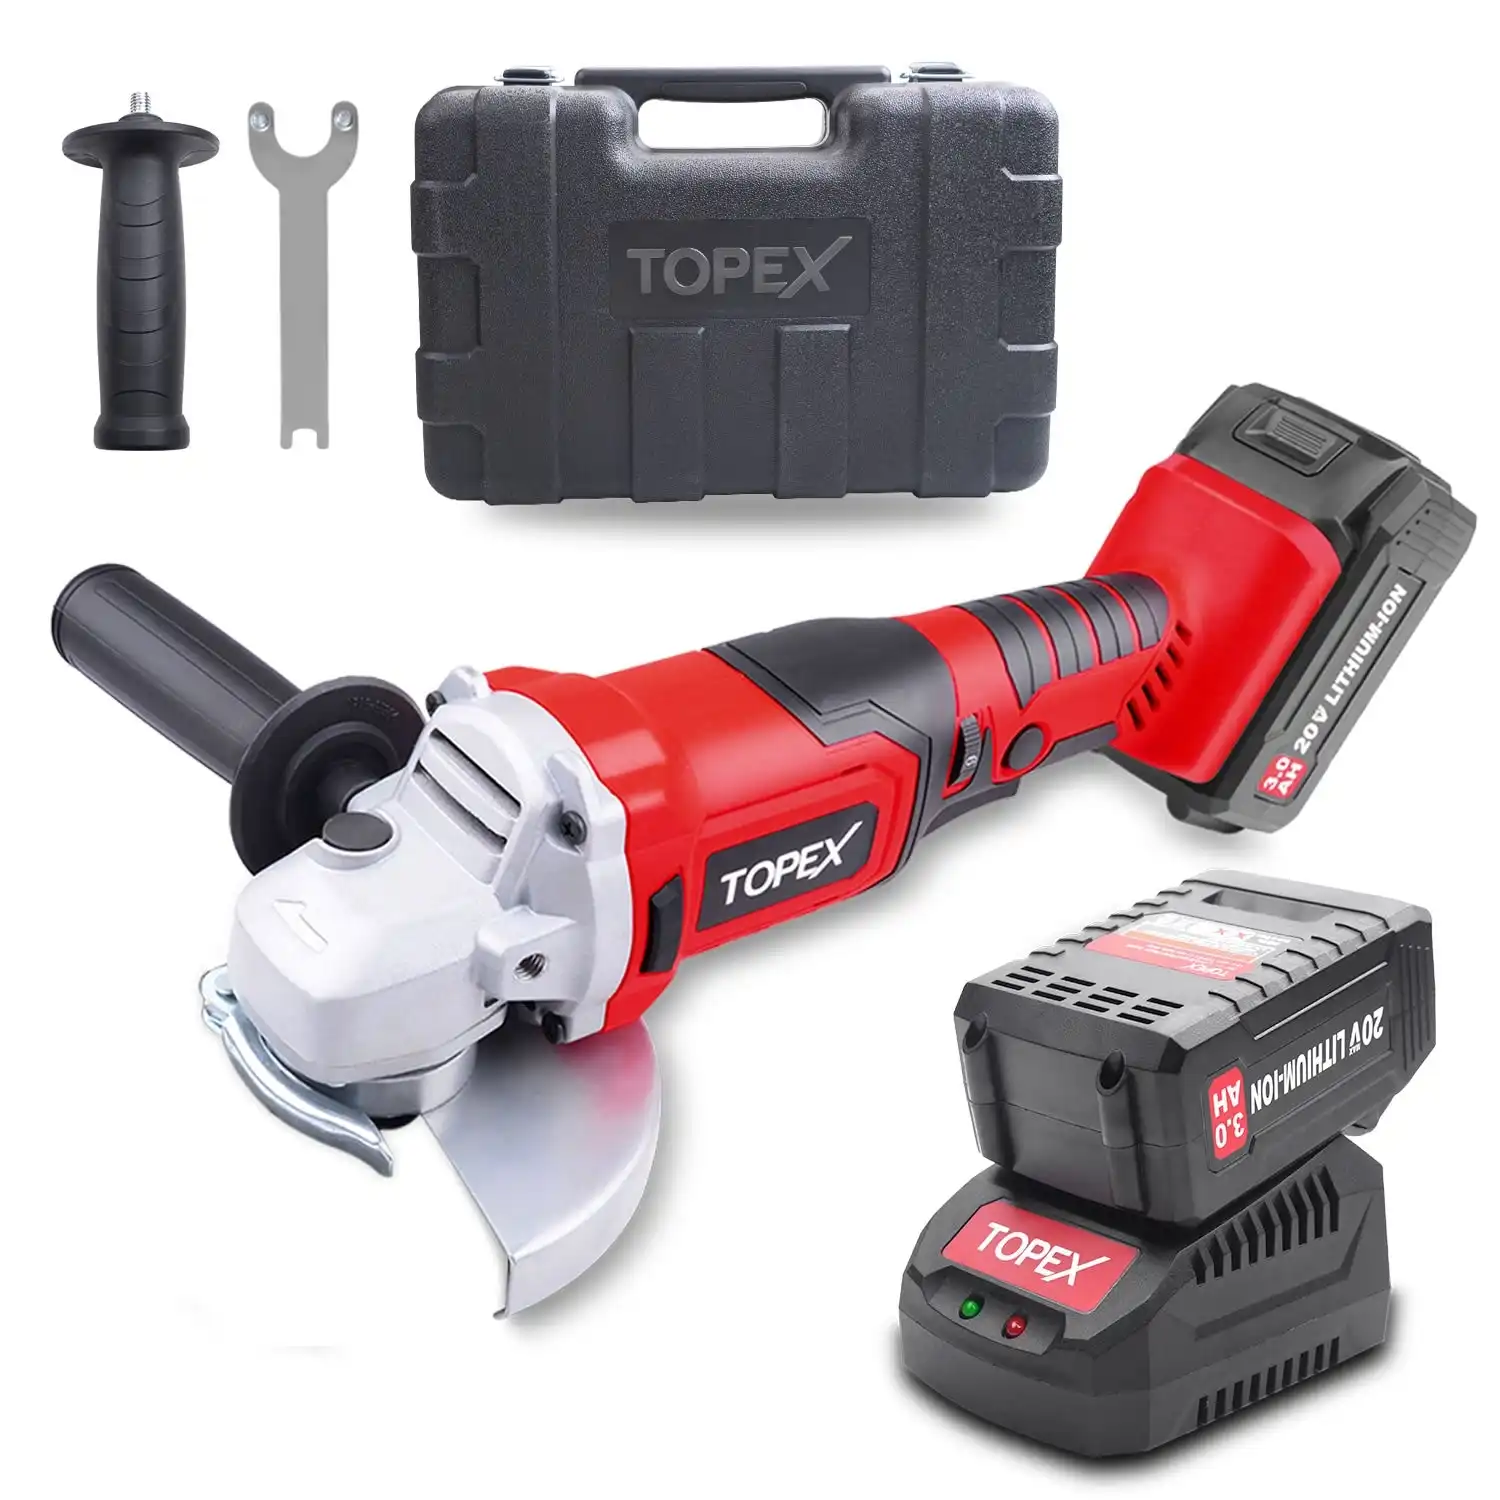 Topex 20V Cordless Angle Grinder 125mm Li-ion Grinding Cutting Power Tool